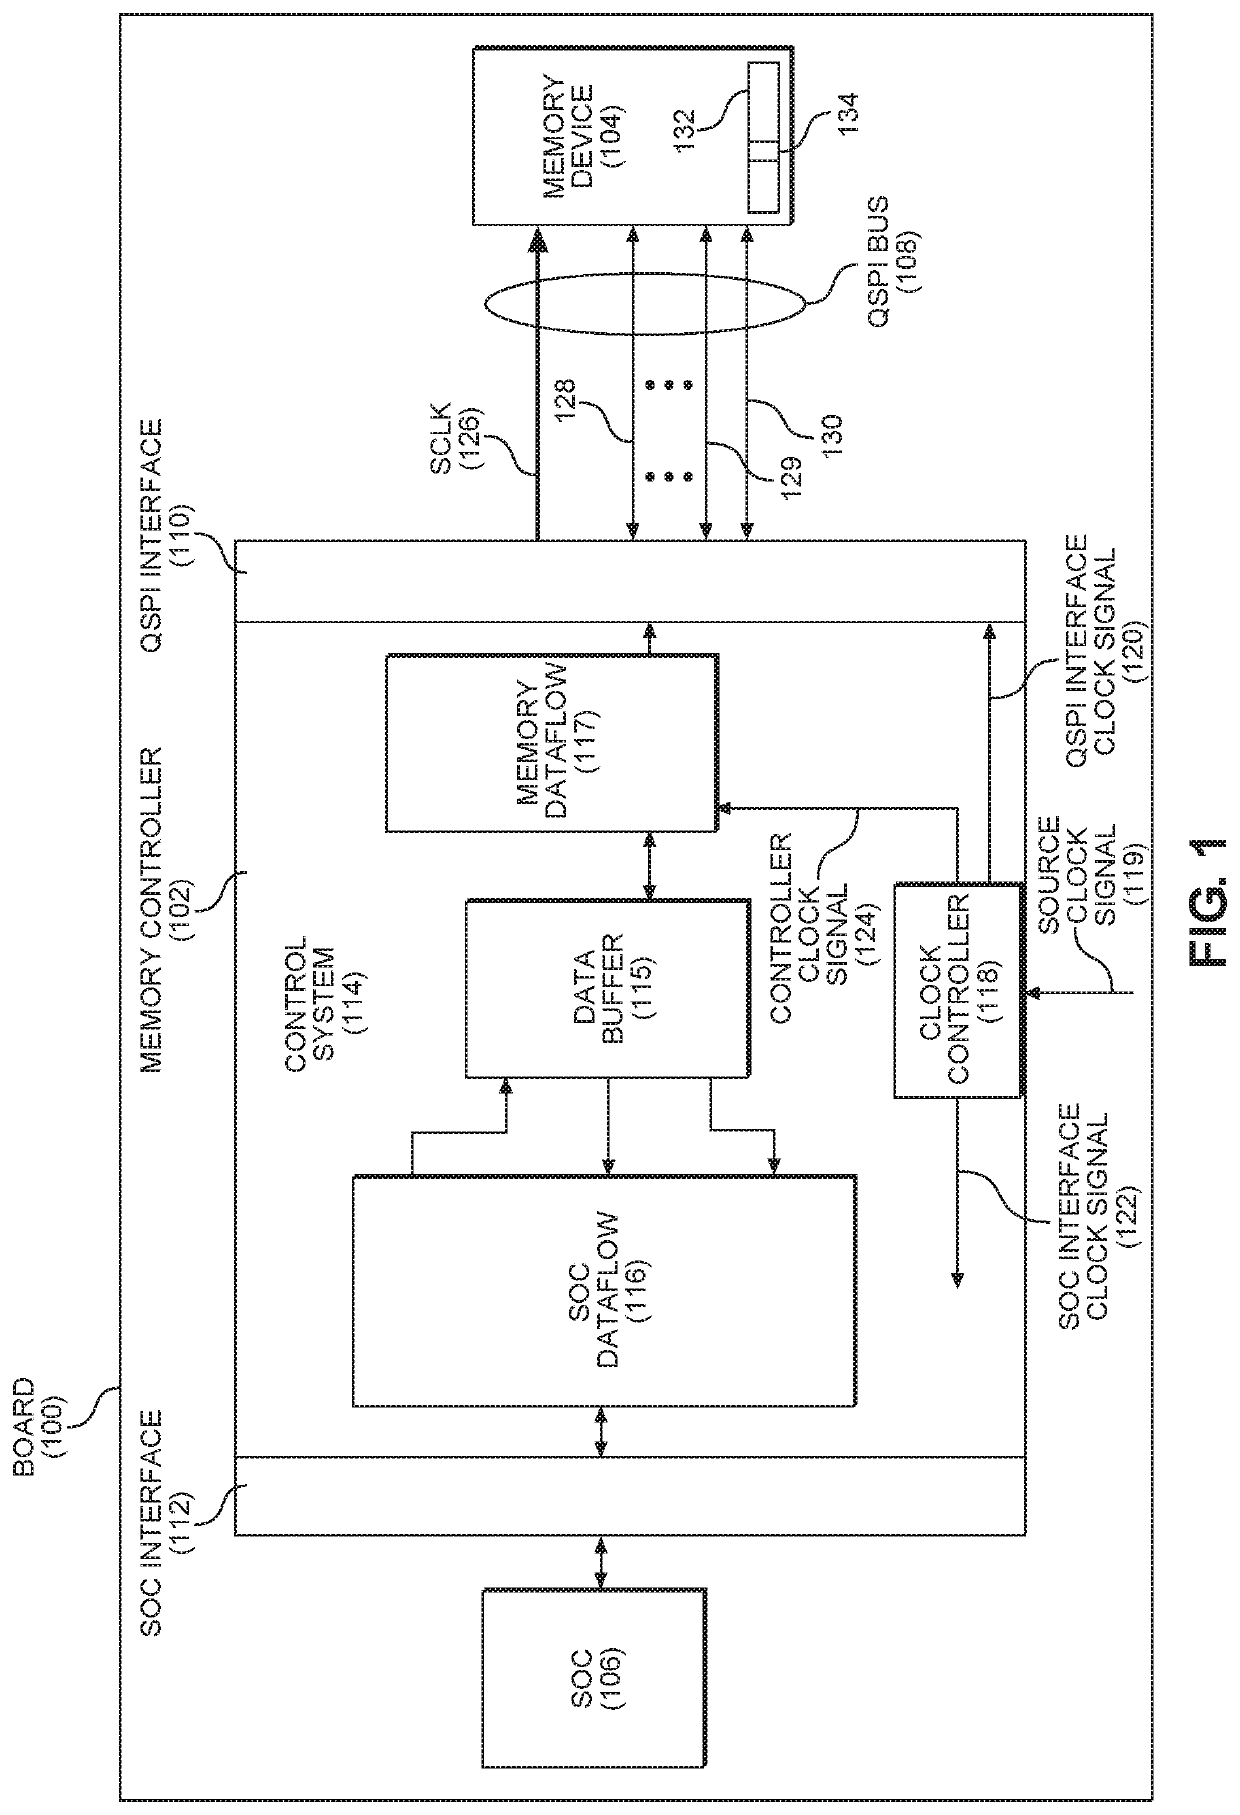 Reducing power consumption of communication interfaces by clock frequency scaling and adaptive interleaving of polling